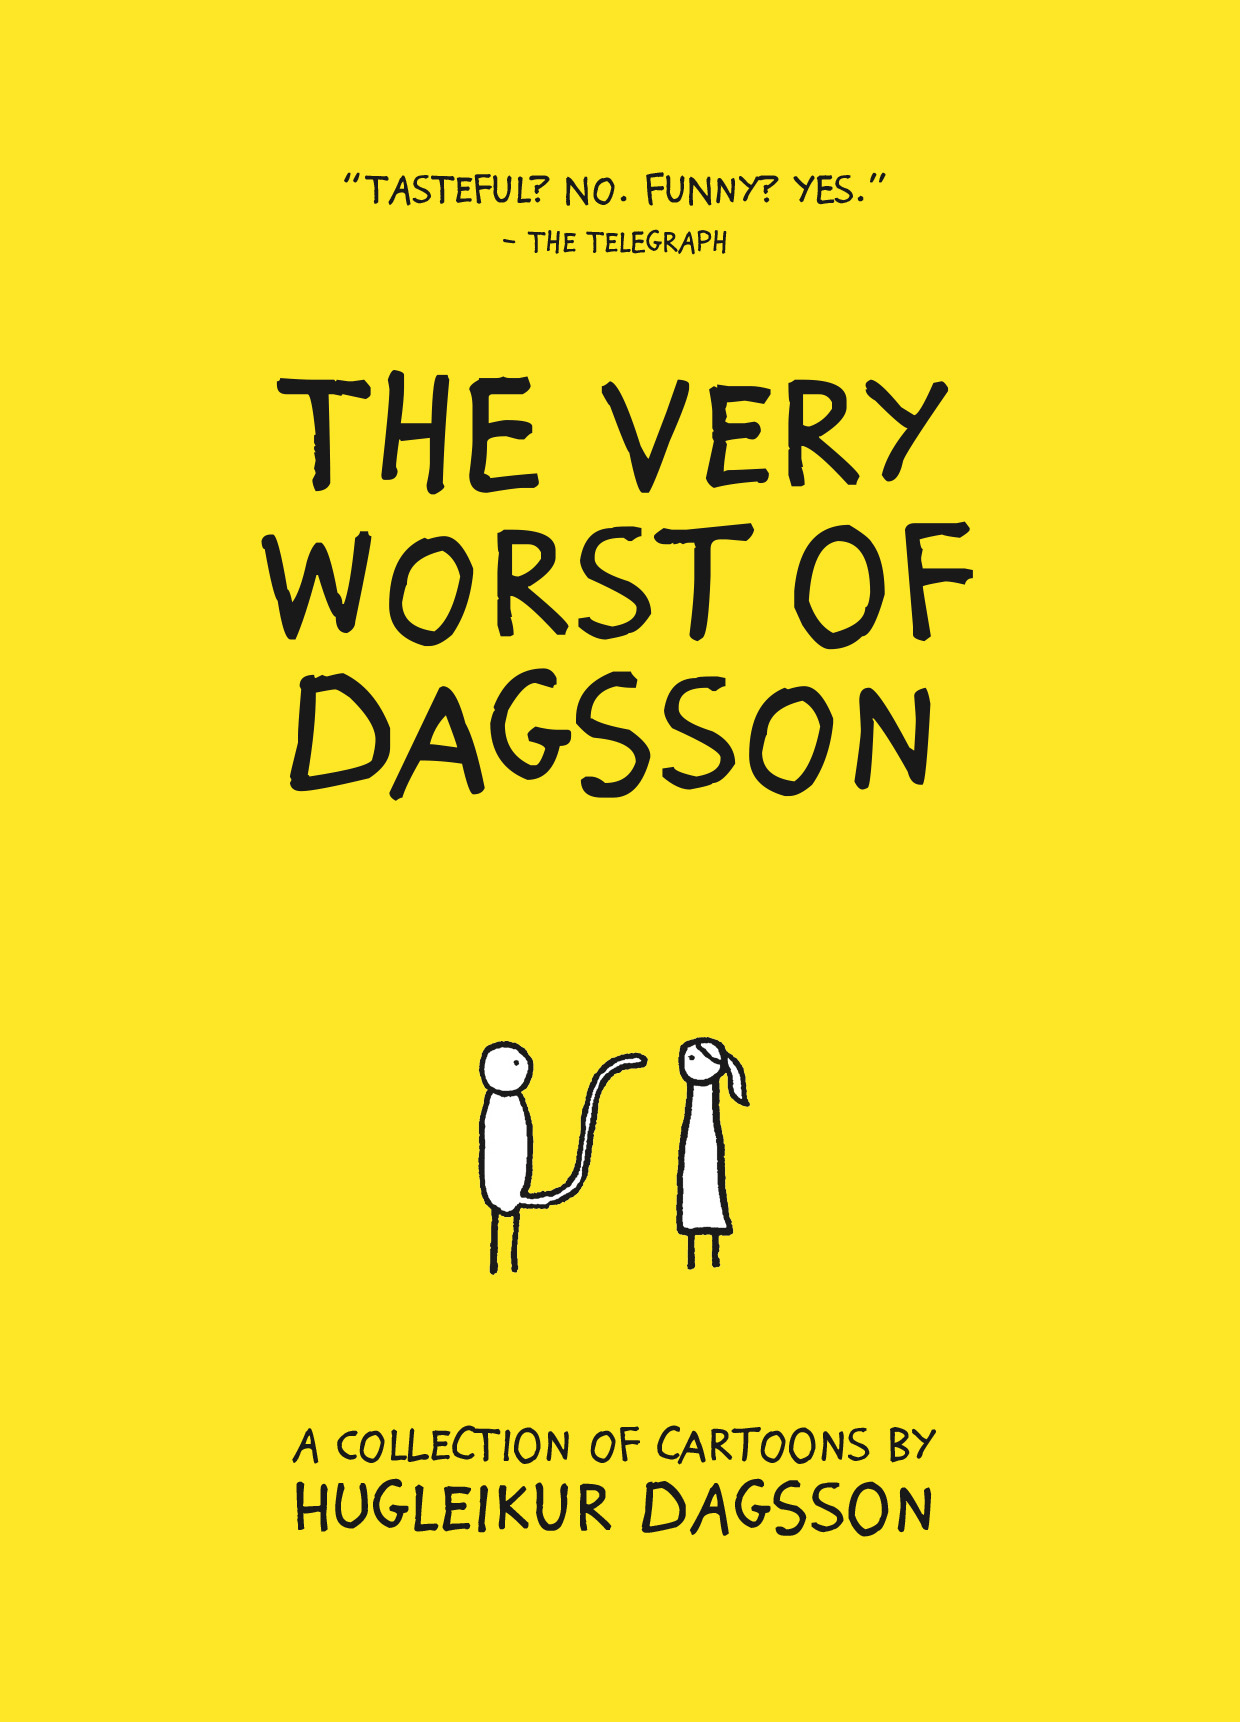 The Bloody Best of Dagsson (2017)